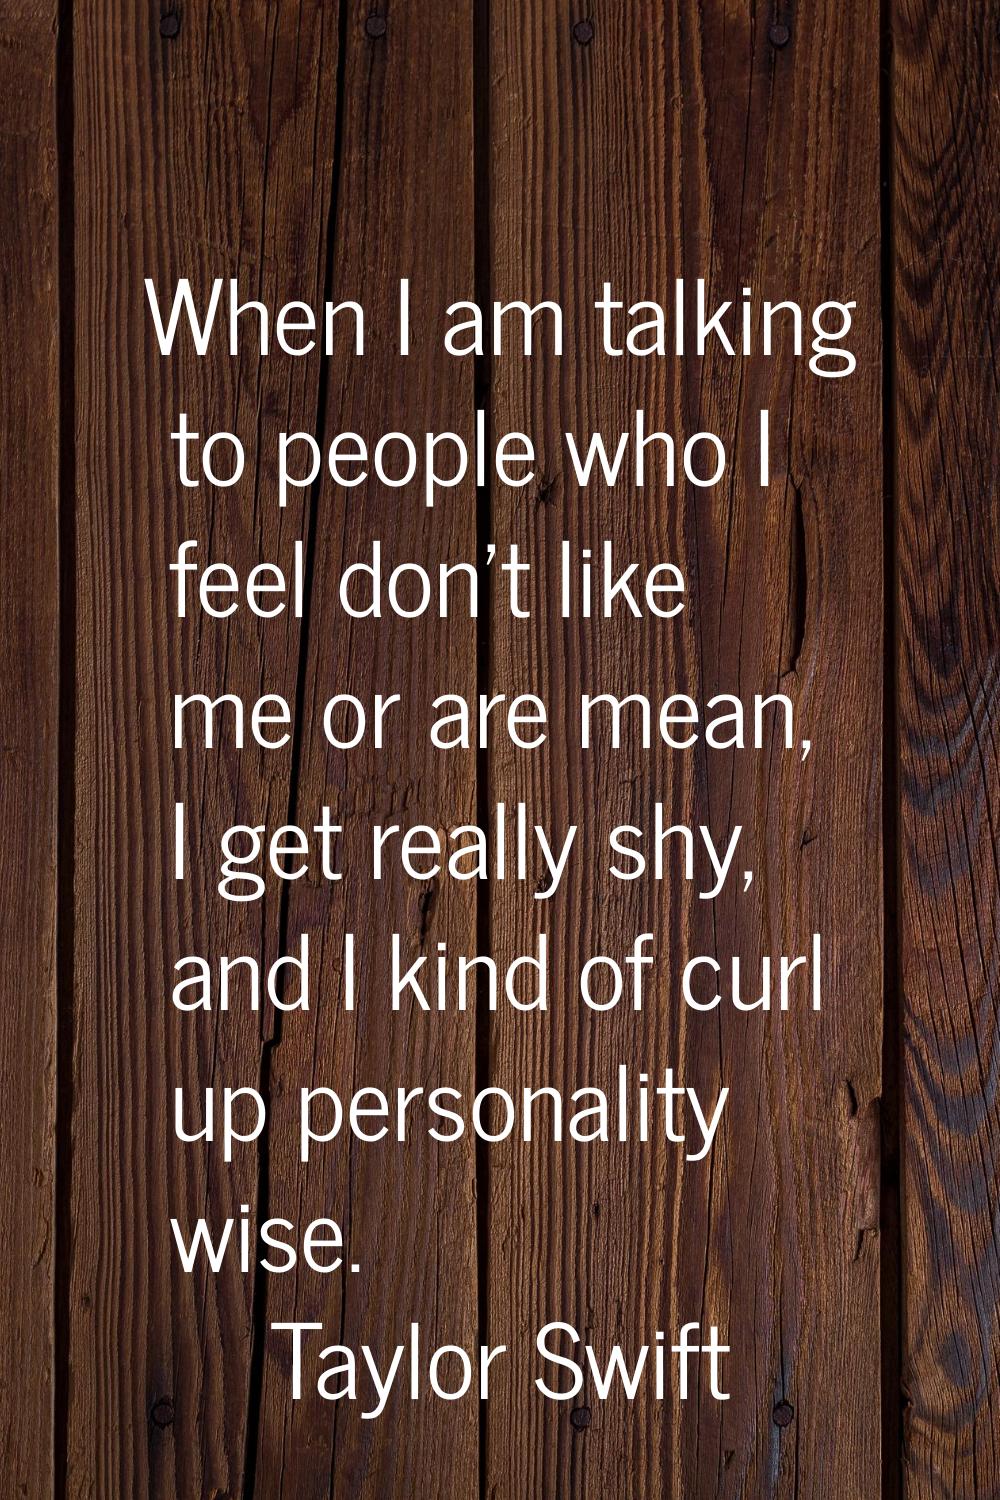 When I am talking to people who I feel don't like me or are mean, I get really shy, and I kind of c